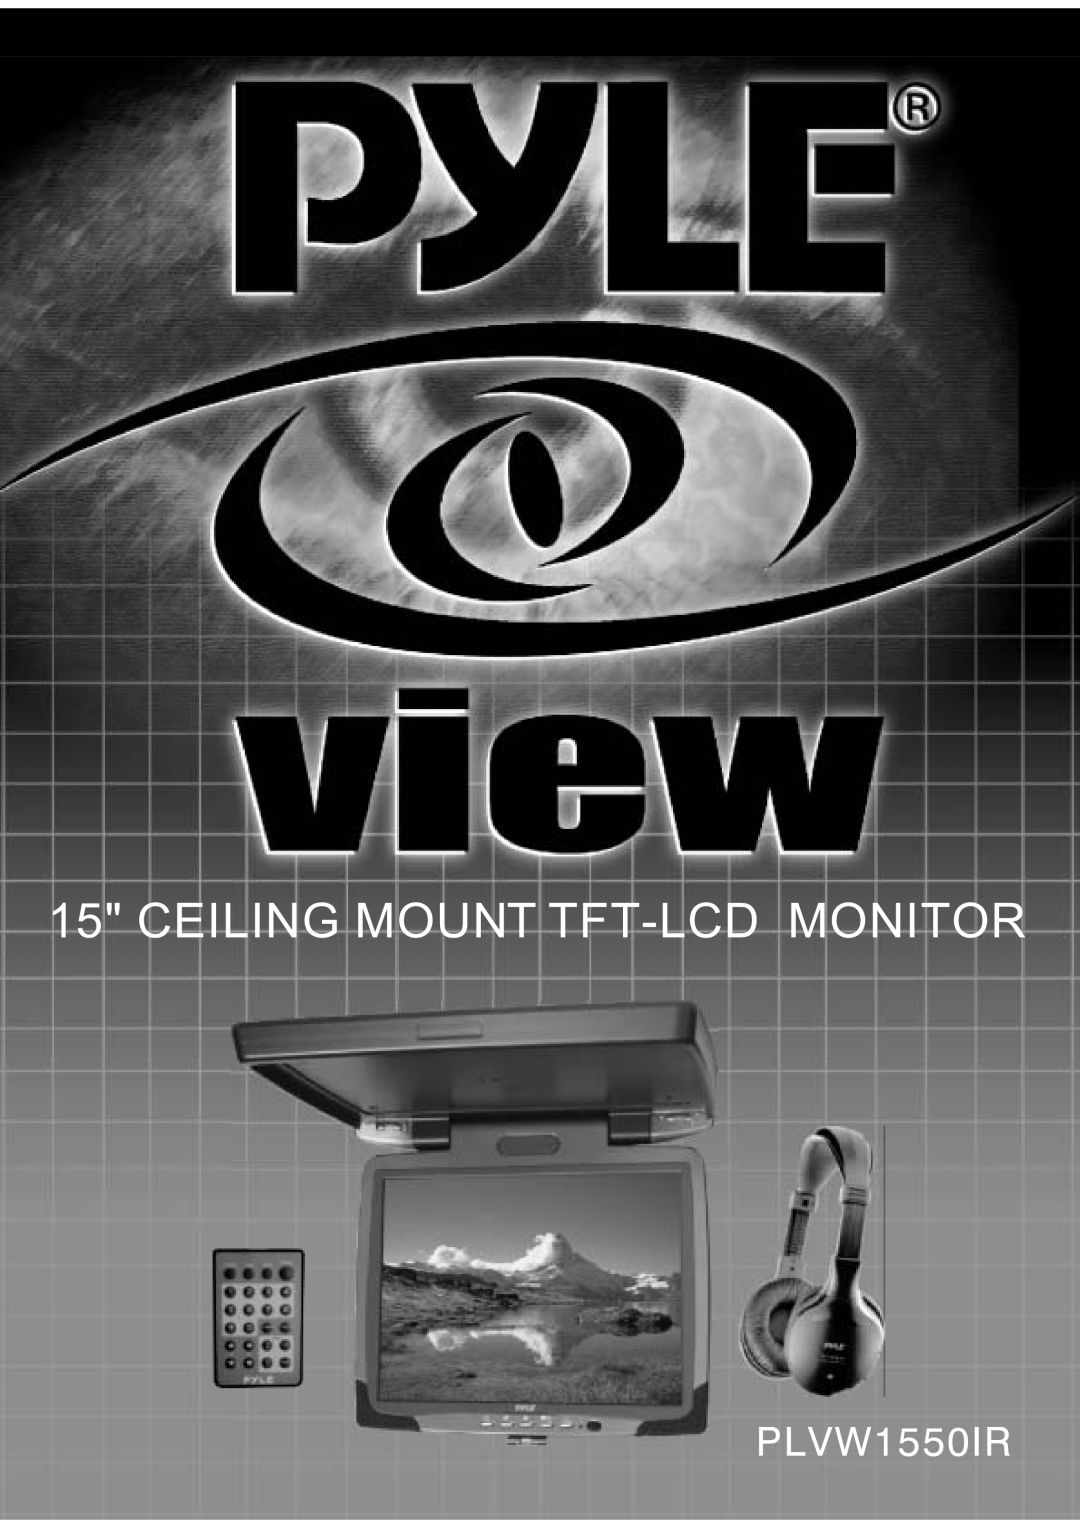 PYLE Audio PLVW1550IR manual Ceiling Mount Tft-Lcd Monitor 